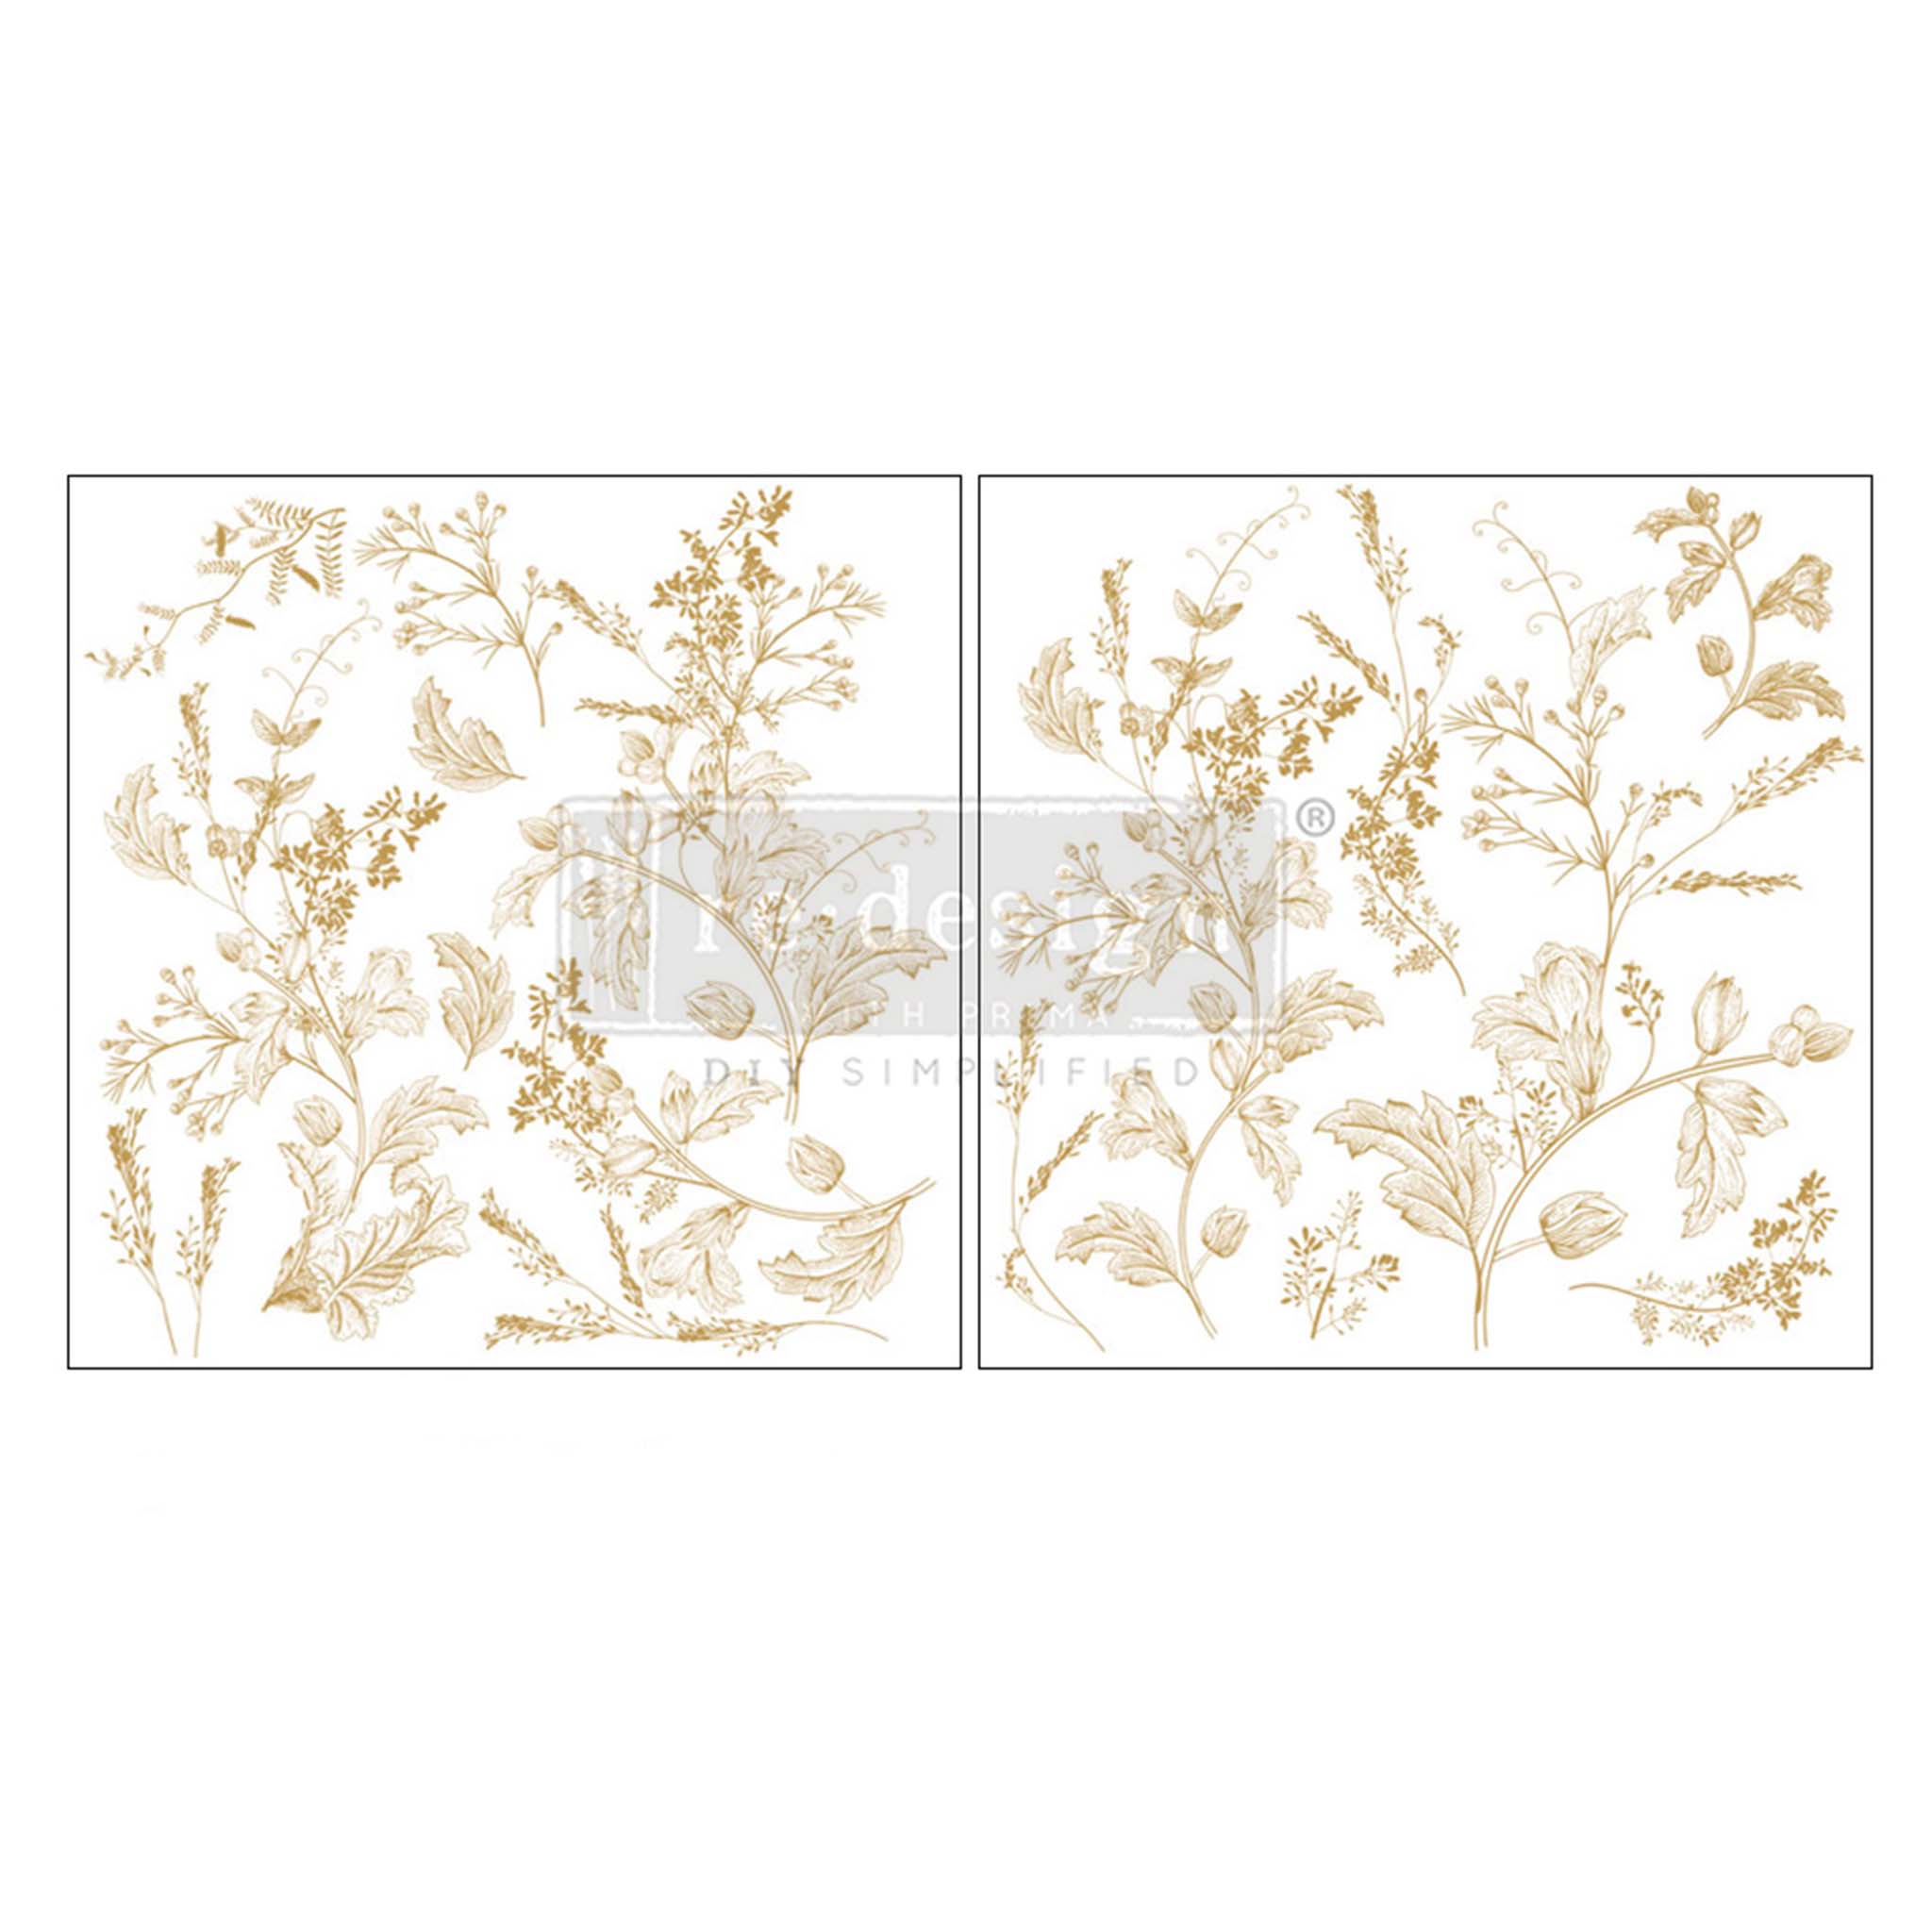 2 sheets of rub-on transfers featuring delicate gold colored plants.